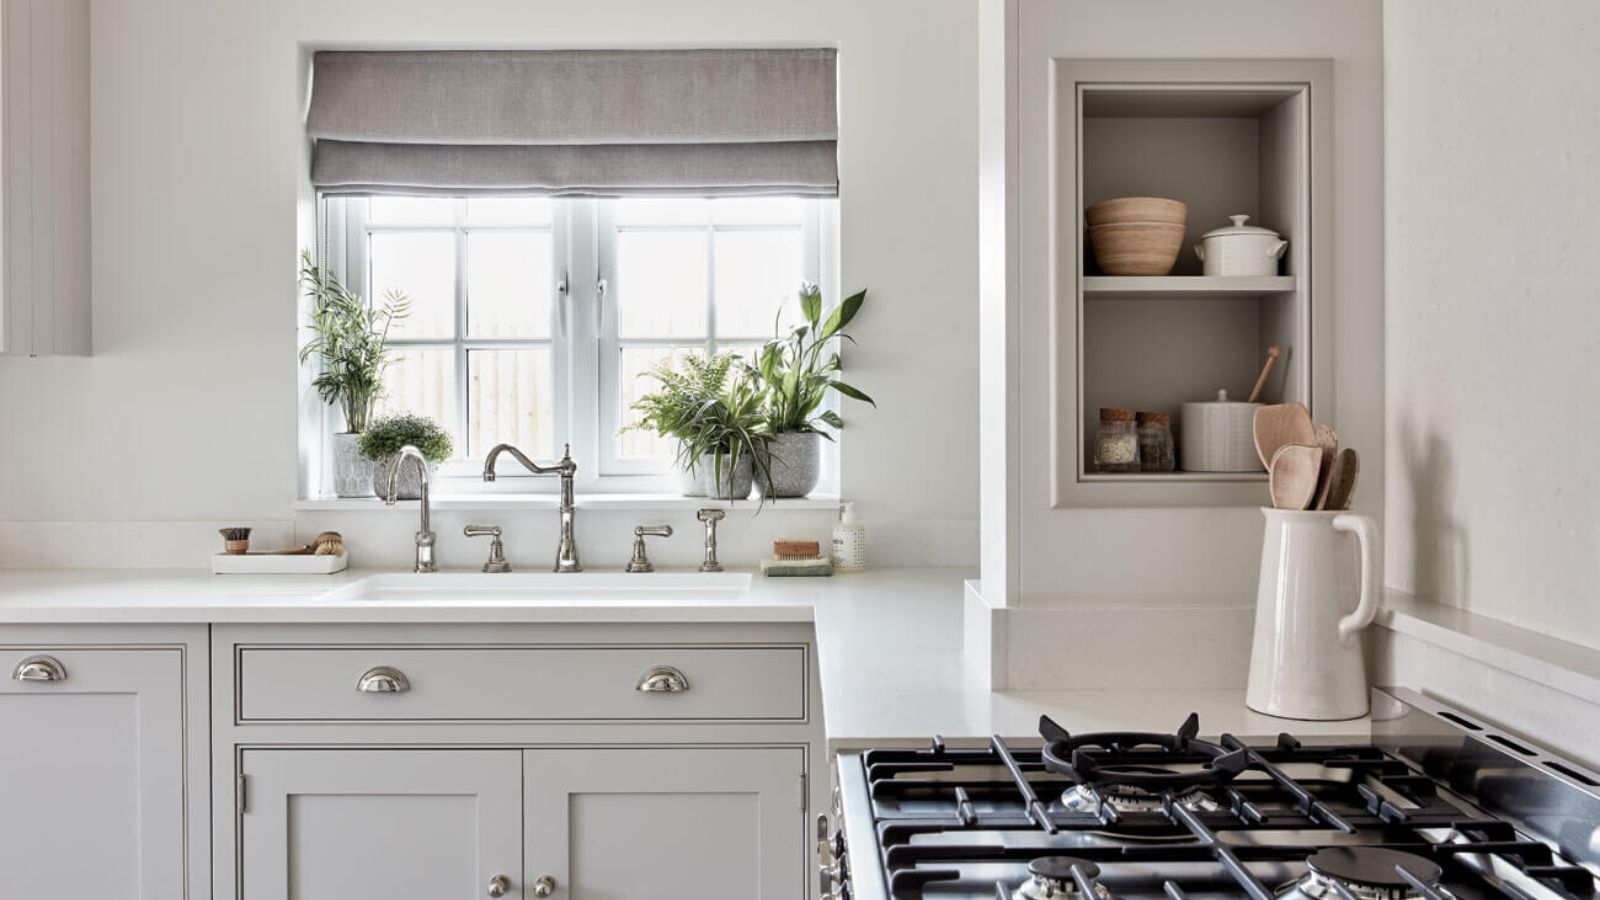 The Best Kitchen Organizers, According to Professionals